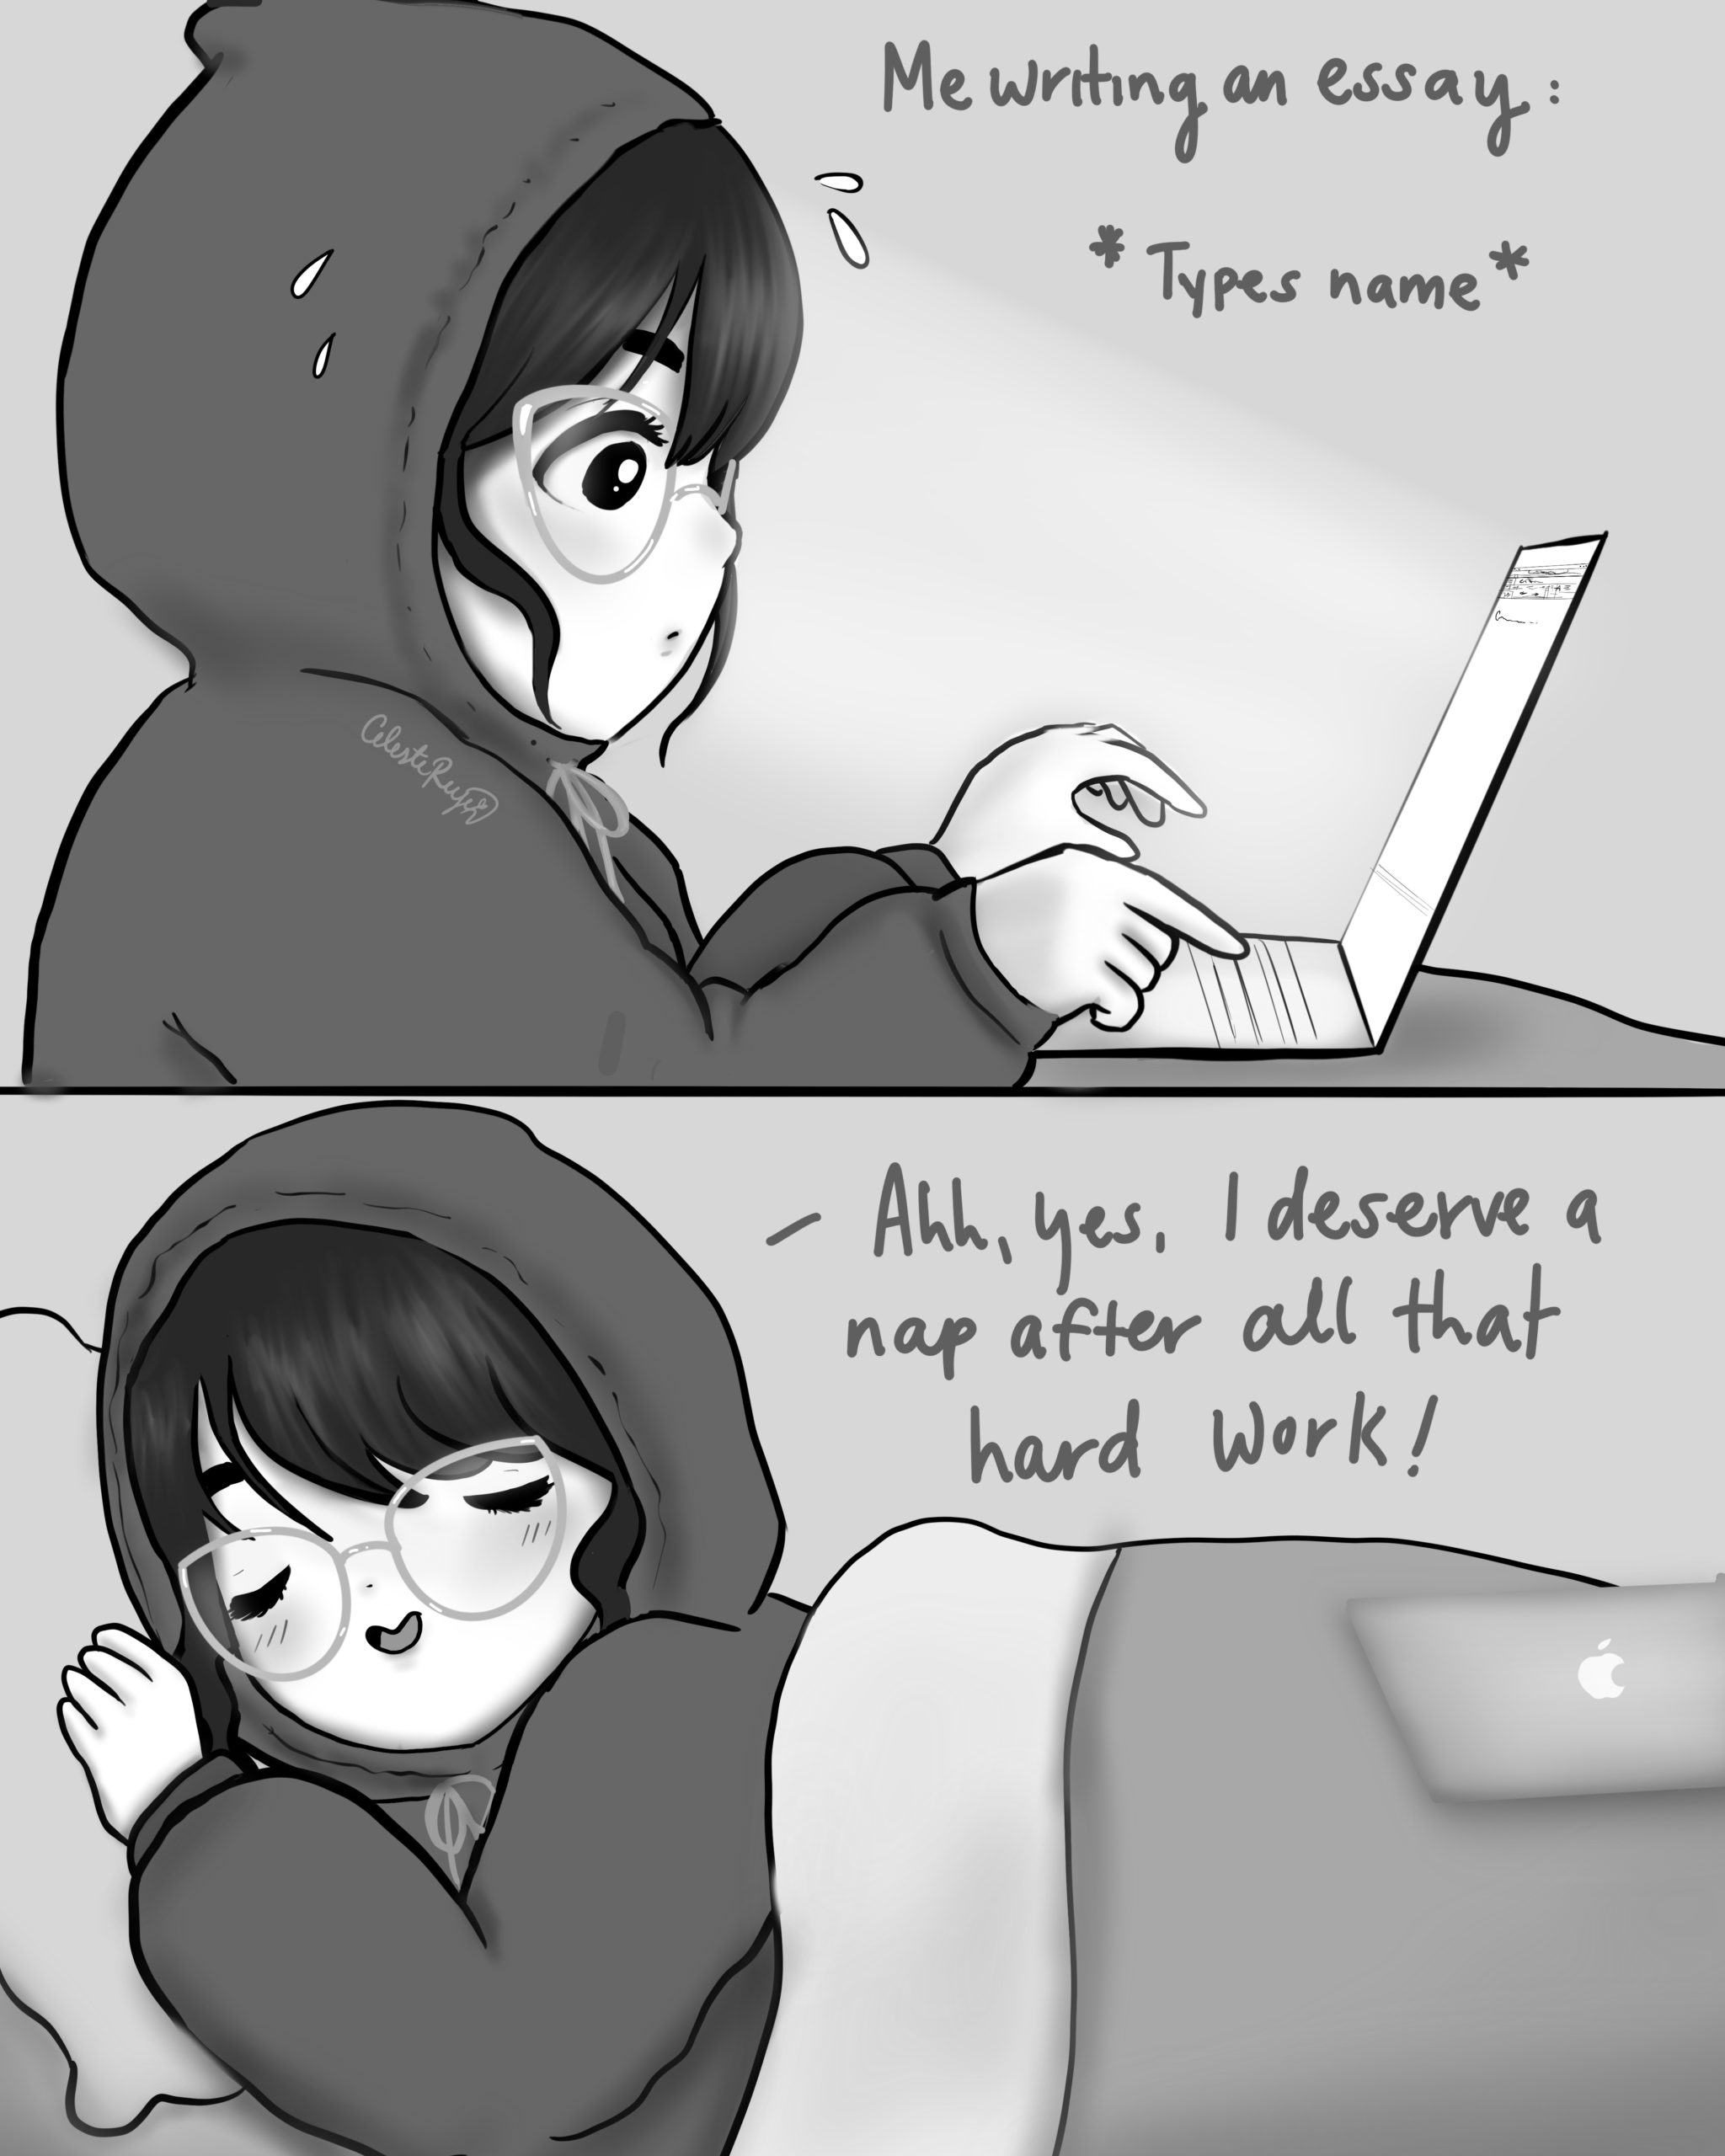 Comic: top panel has girl on laptop "me writing an essay: *types name*", bottom panel has girl laying in bed "ahh, yes, I deserve a nap after all that hard work!"